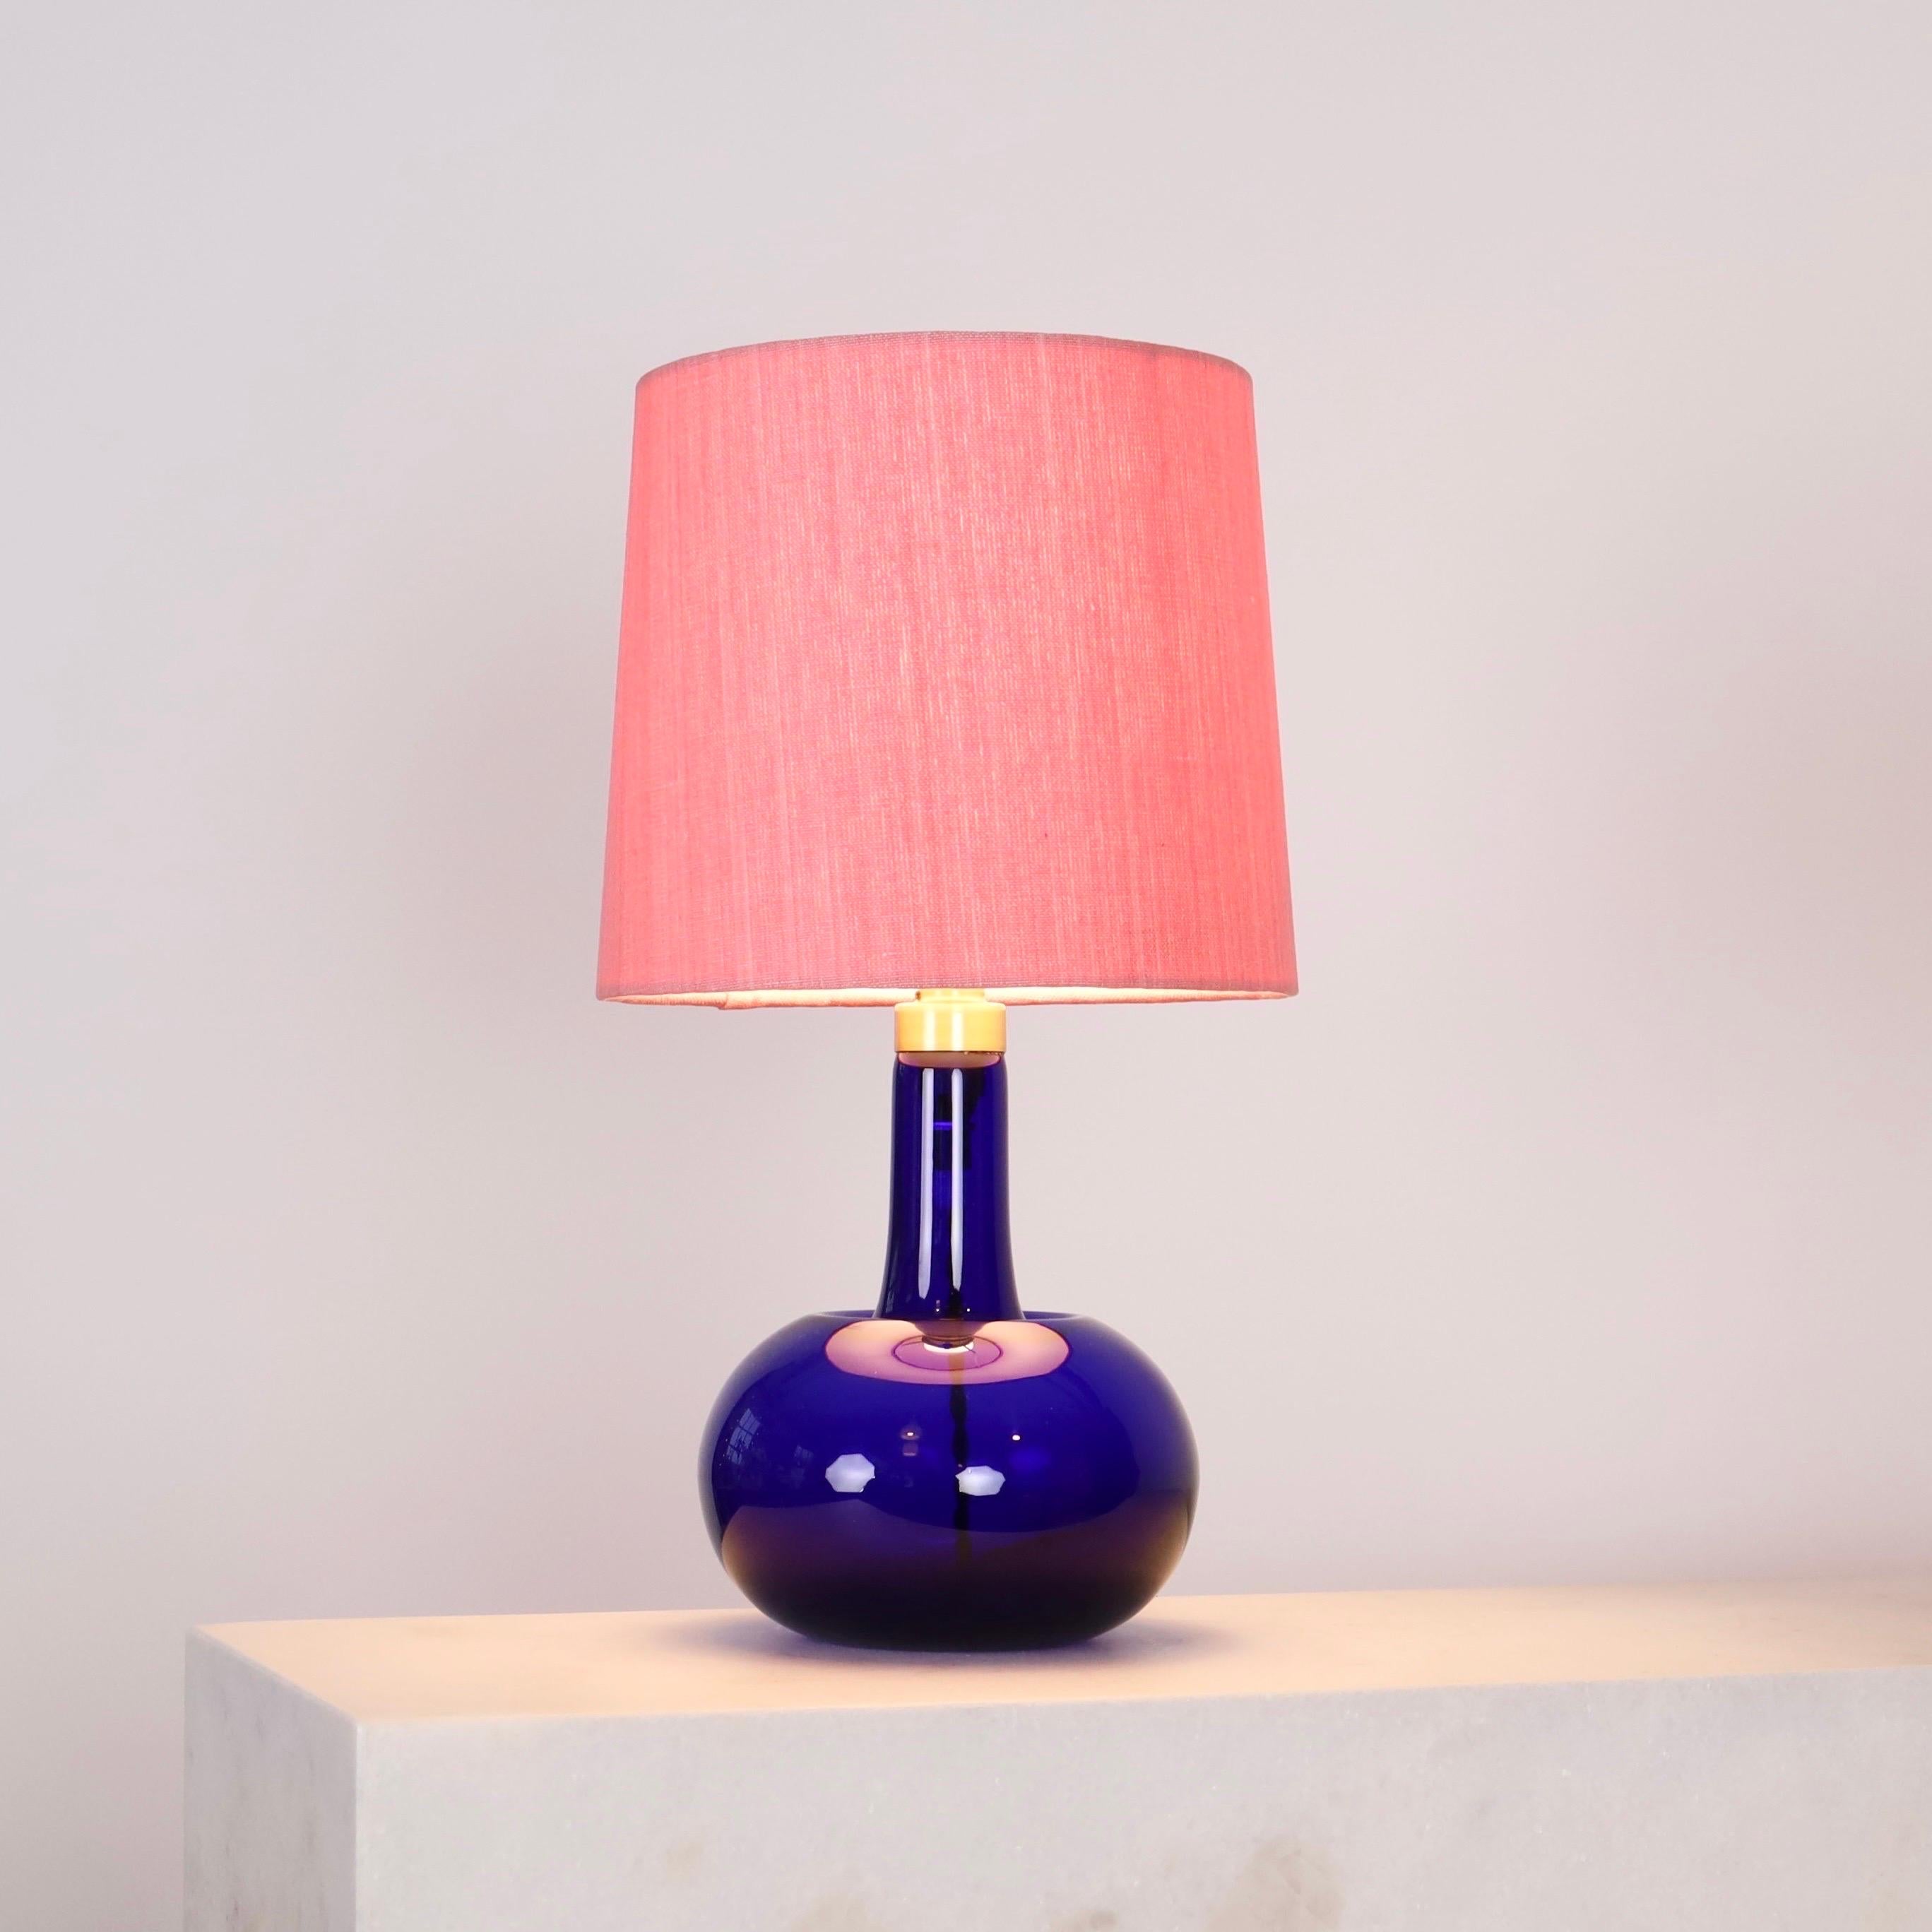 A blue desk lamp designed by Michael Bang for Danish Holmegaard Glasværk in 1975 accomplished new a shade made of artisan textile from Mallorca. A colorful attribution to the a modern interior.

* A blue glass table lamp with brass neck and a pink